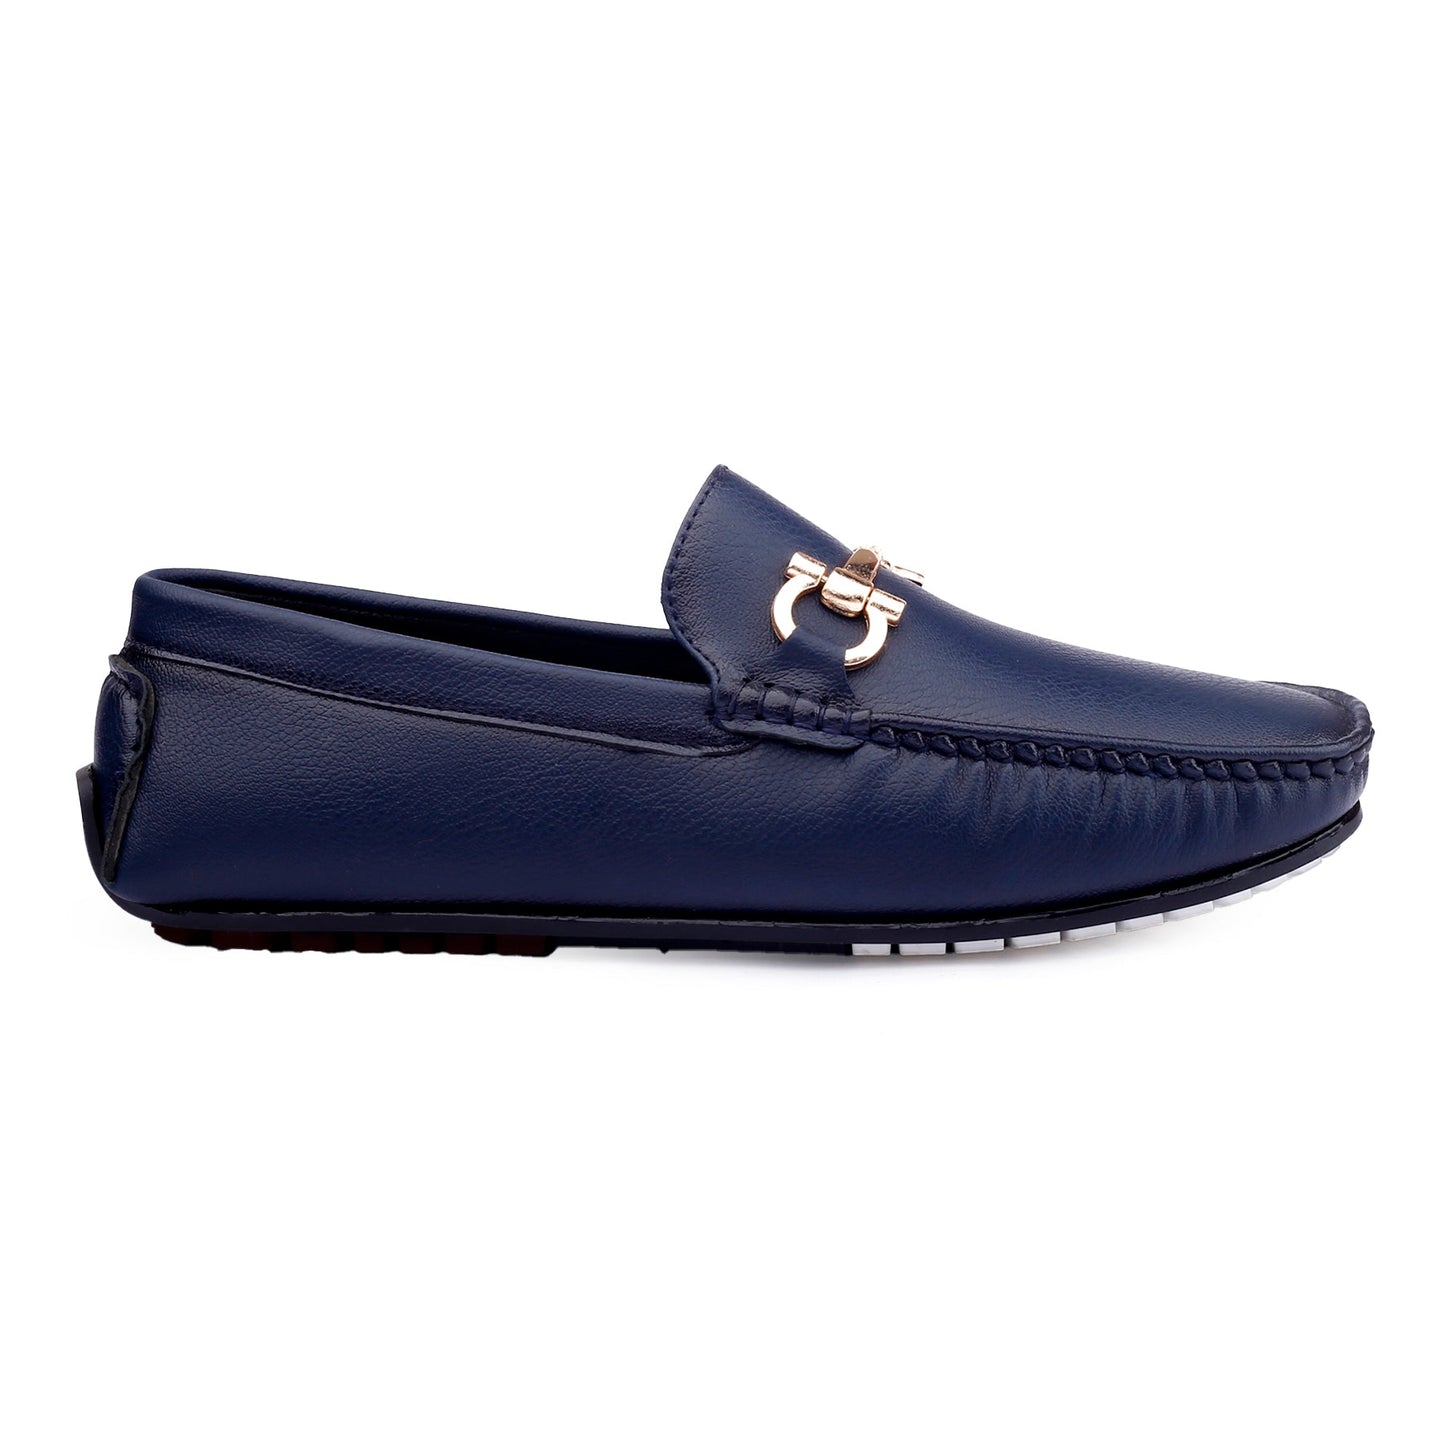 Men's Faux Leather Buckle Designer Loafers Shoes